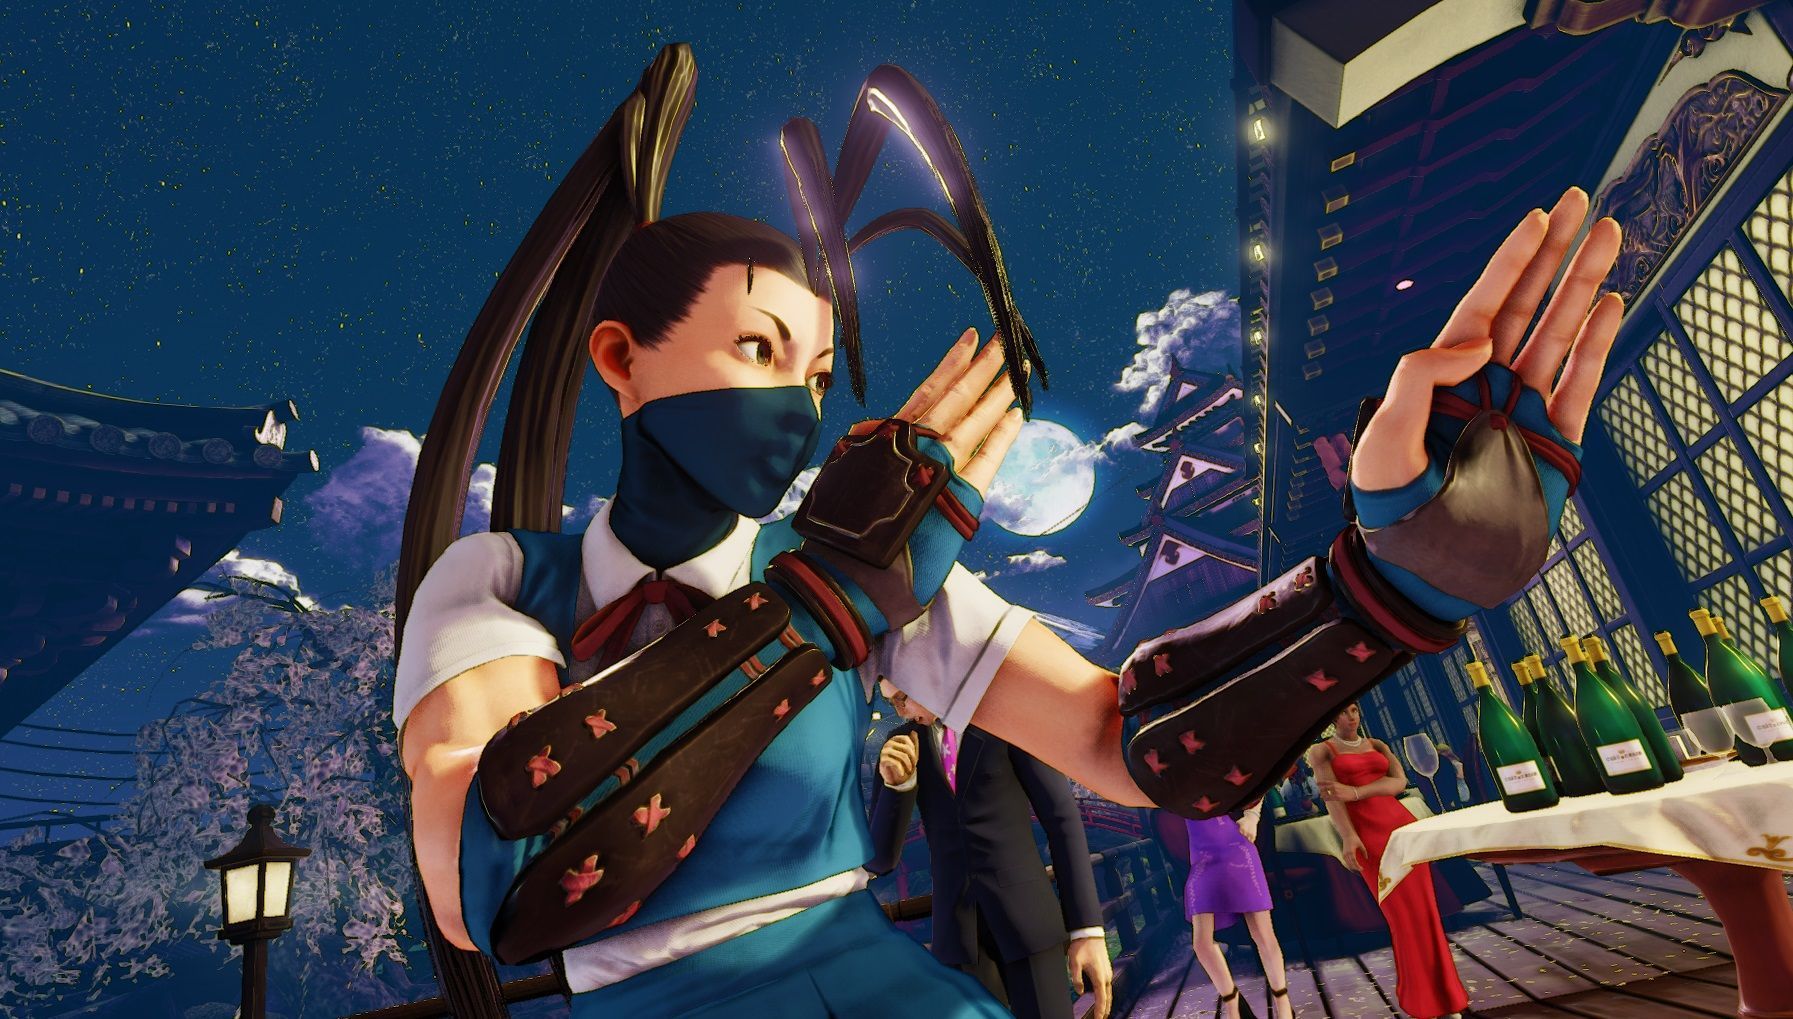 5 Characters That Should Be Added To Street Fighter V Season 5